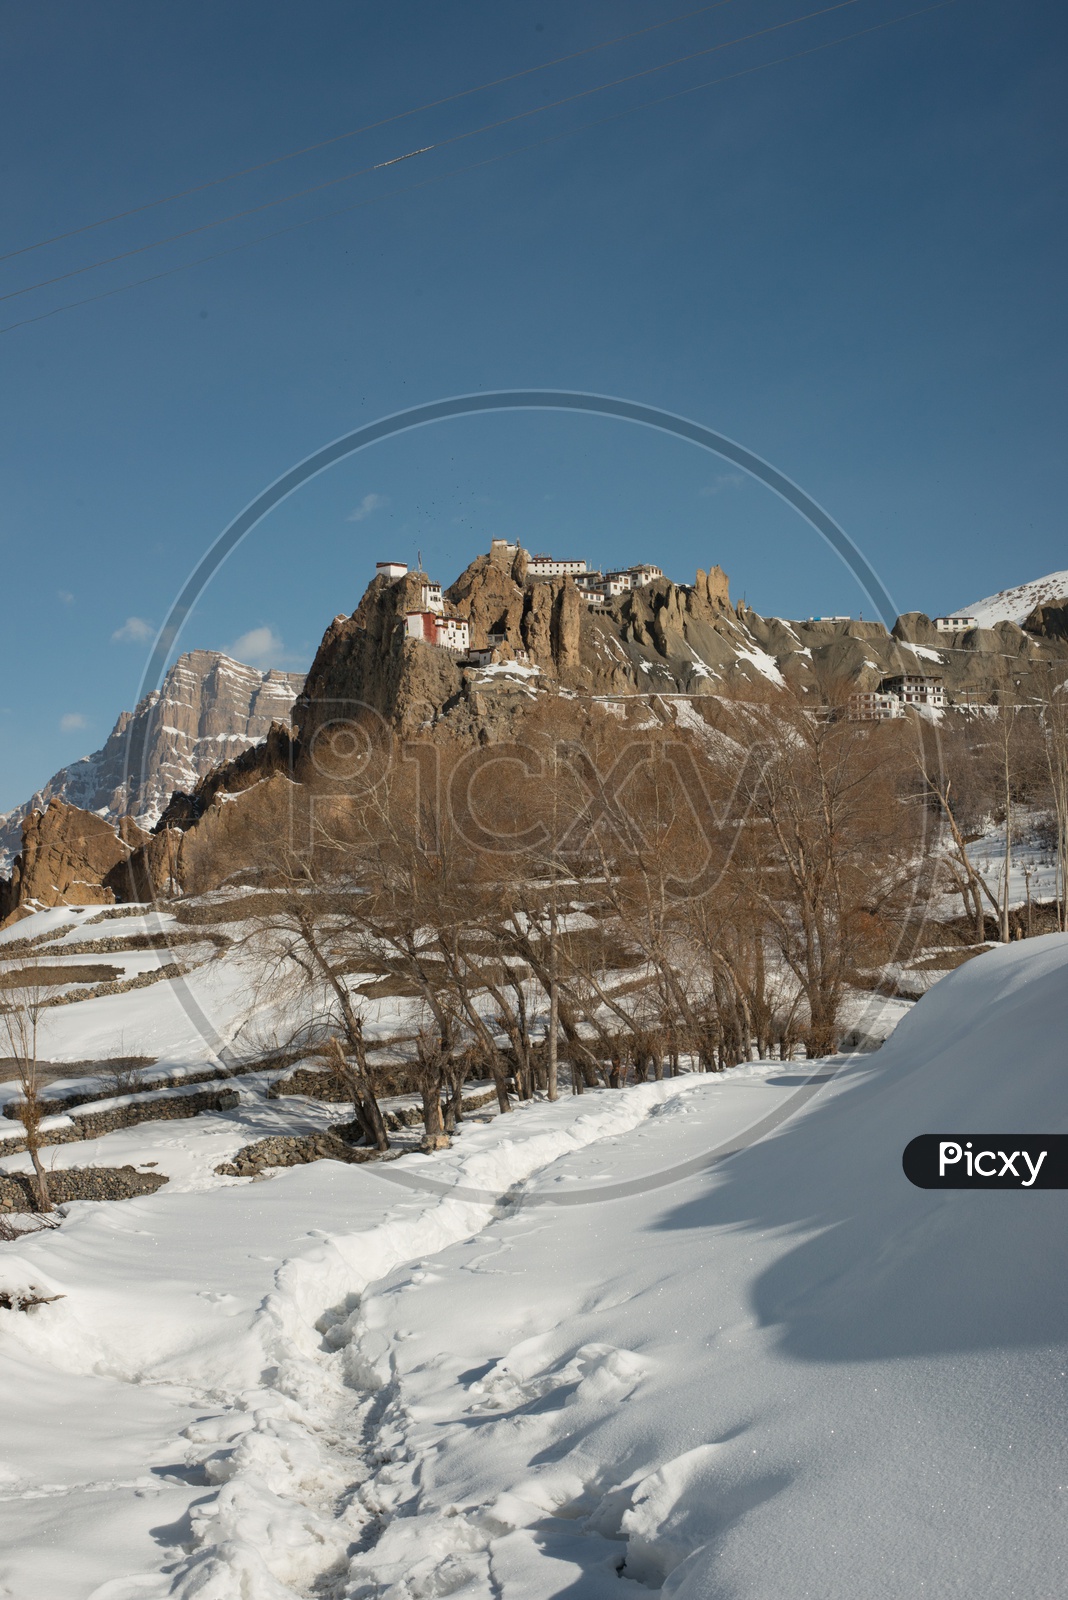 Dhankar Monastery on Mountain Surrounded by Snow in Winter